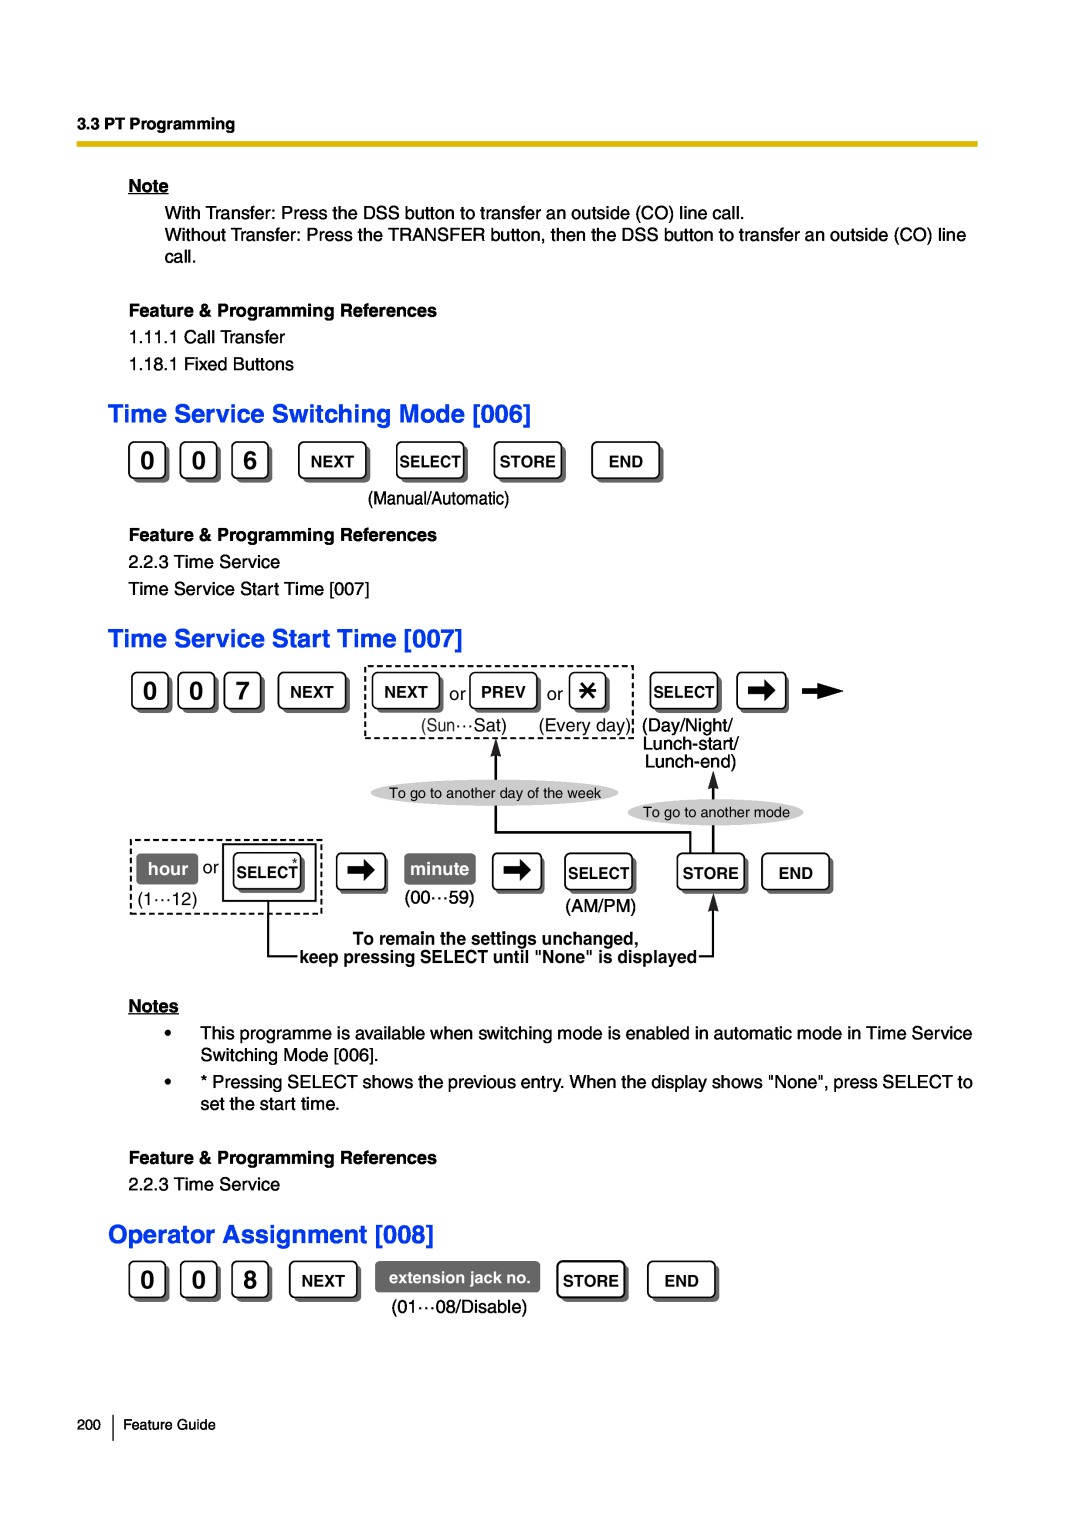 Panasonic kx-tea308 Time Service Switching Mode, Time Service Start Time, Operator Assignment, hour or, minute, Notes 